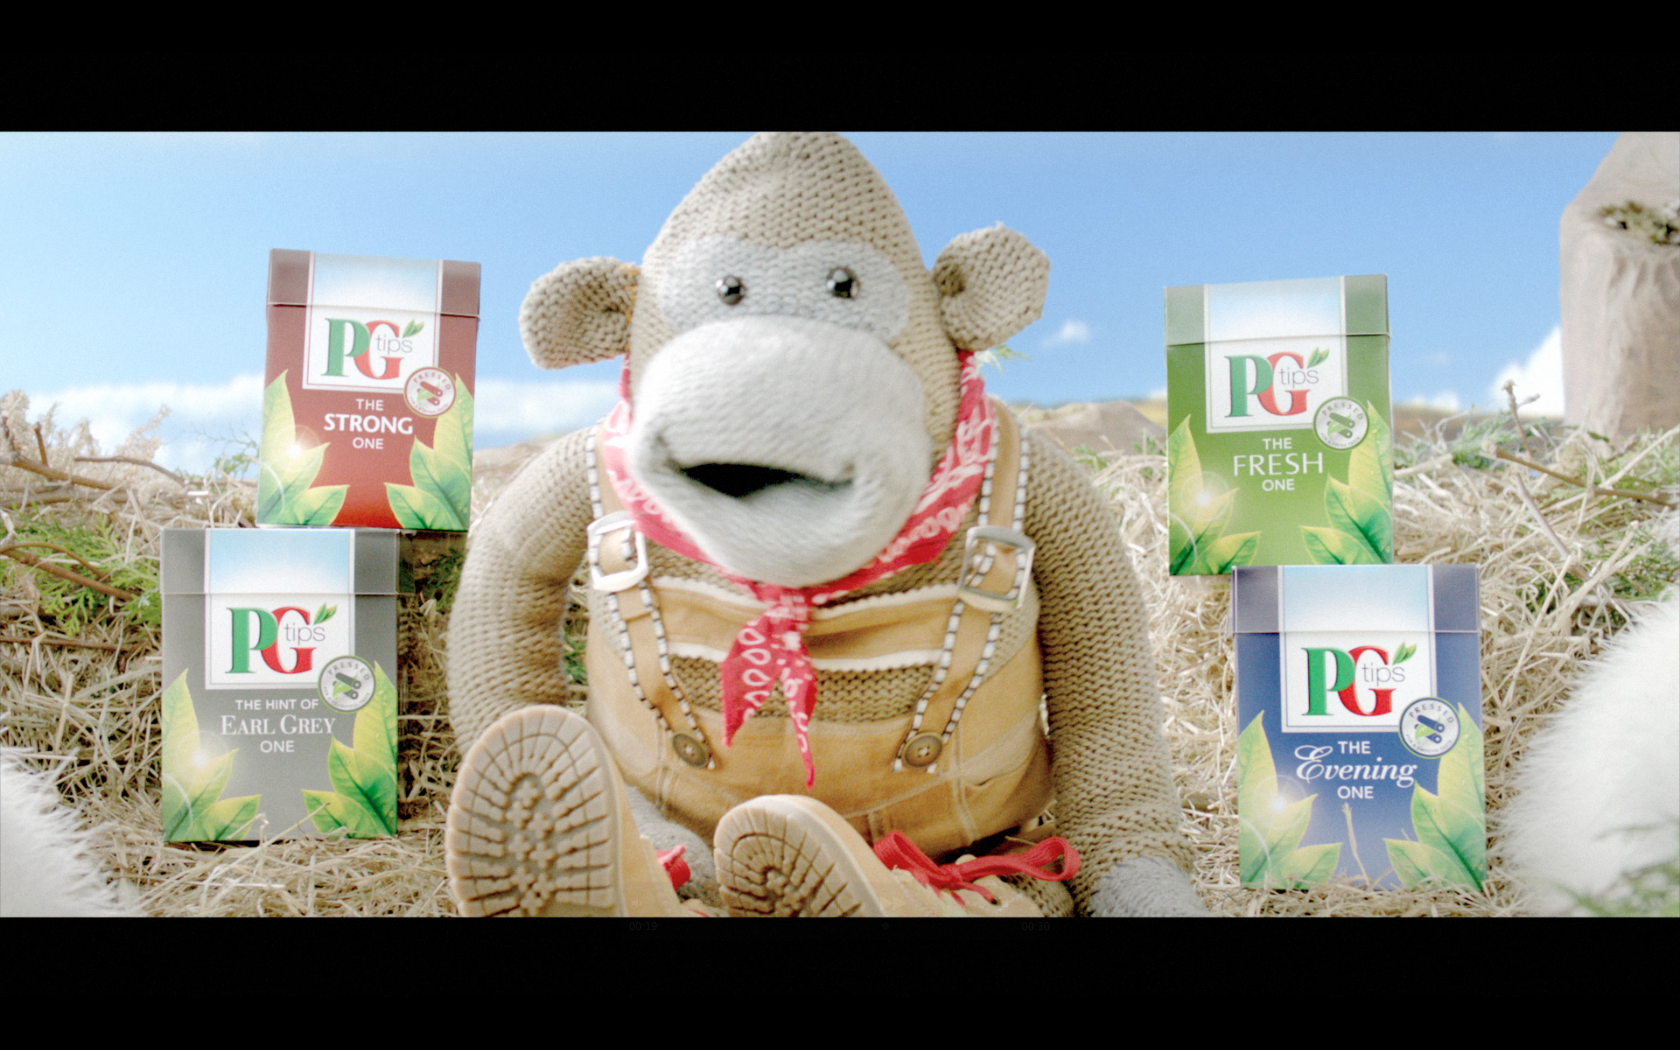 PG tips launches new TV ad campaign